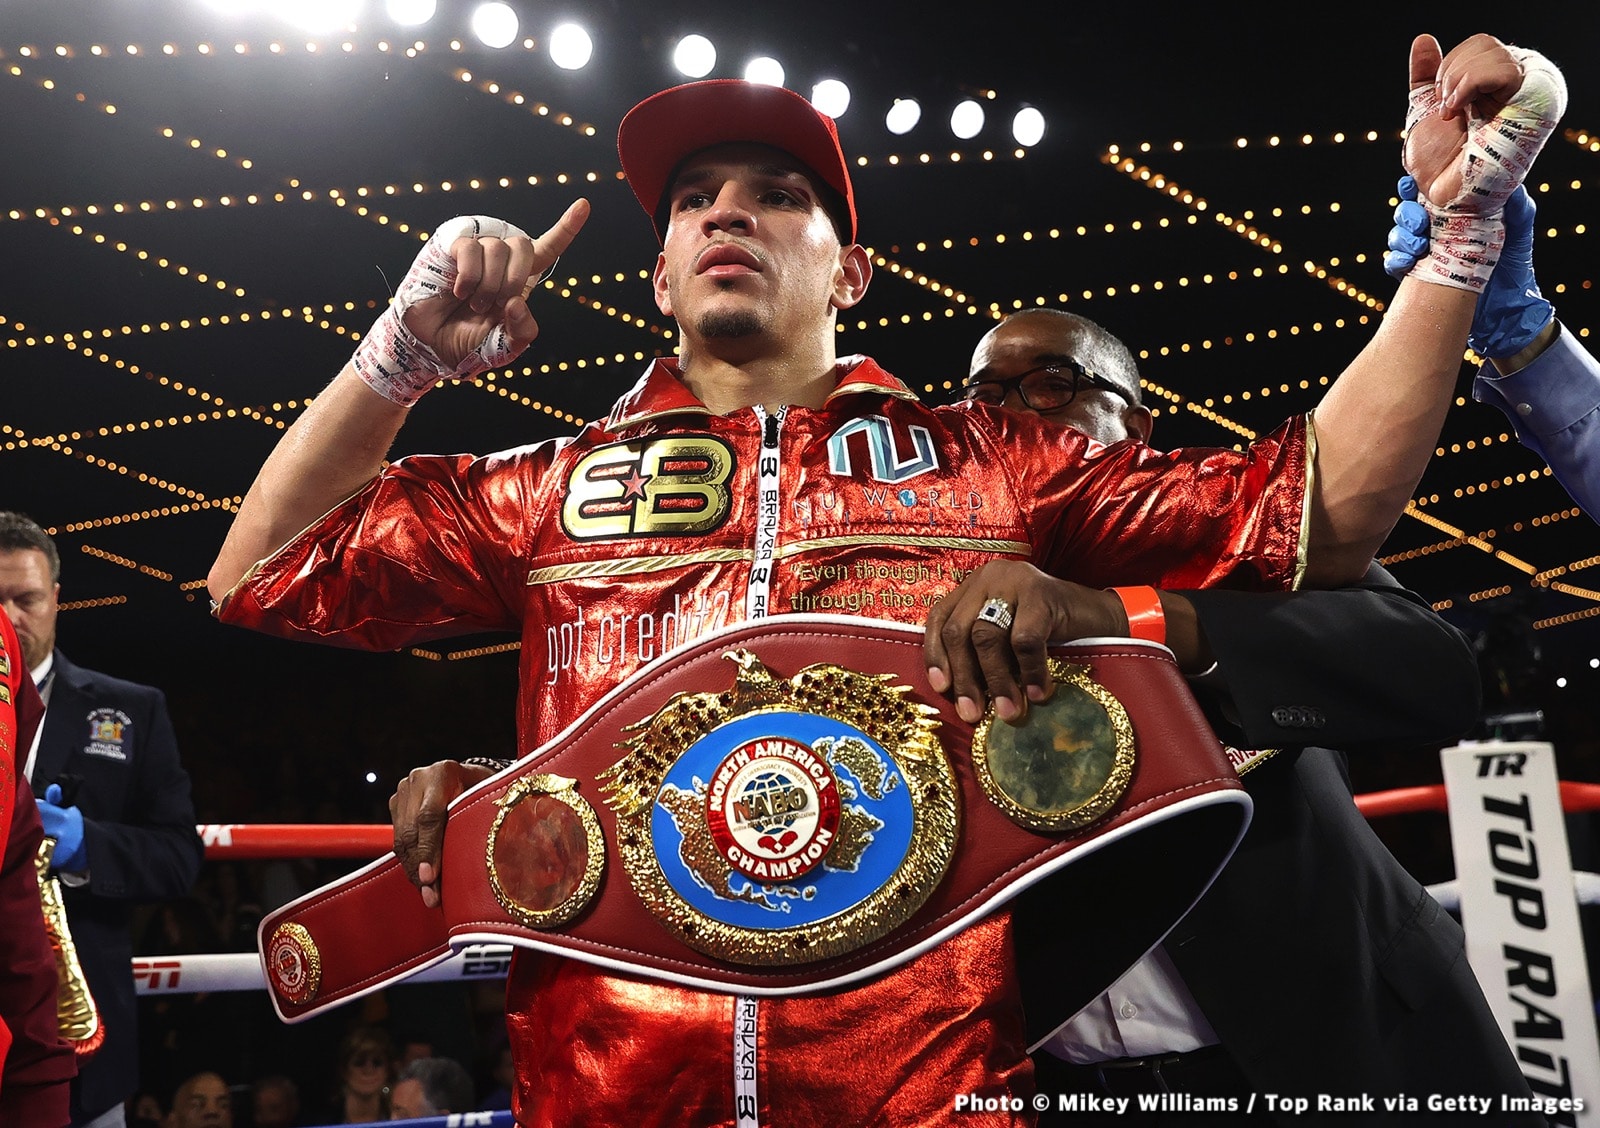 Edgar Berlanga receives criticism from boxing media and his fans